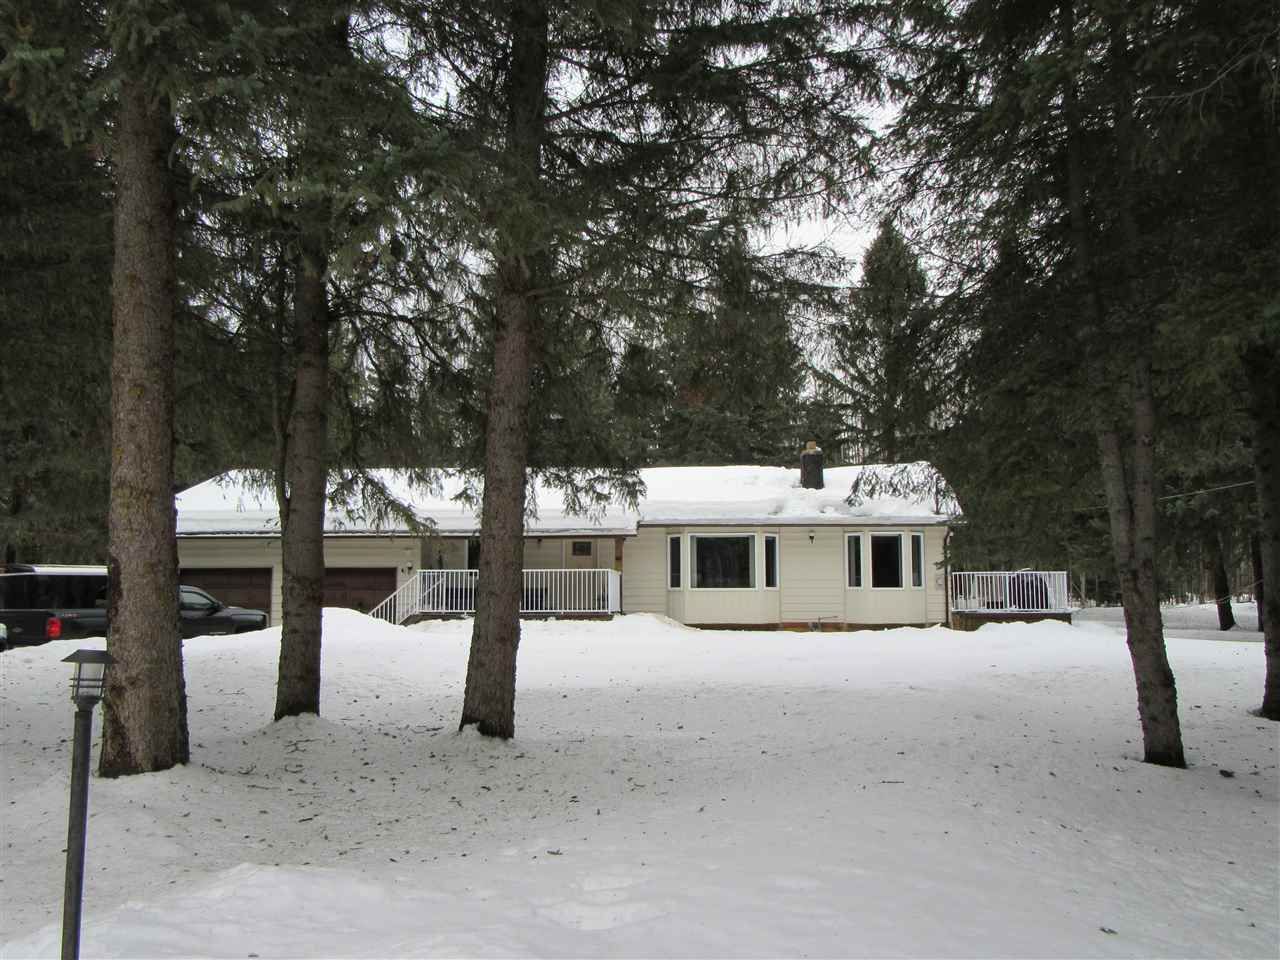 Main Photo: 2430 PROGRESS Road in Prince George: Old Summit Lake Road House for sale (PG City North (Zone 73))  : MLS®# R2431821